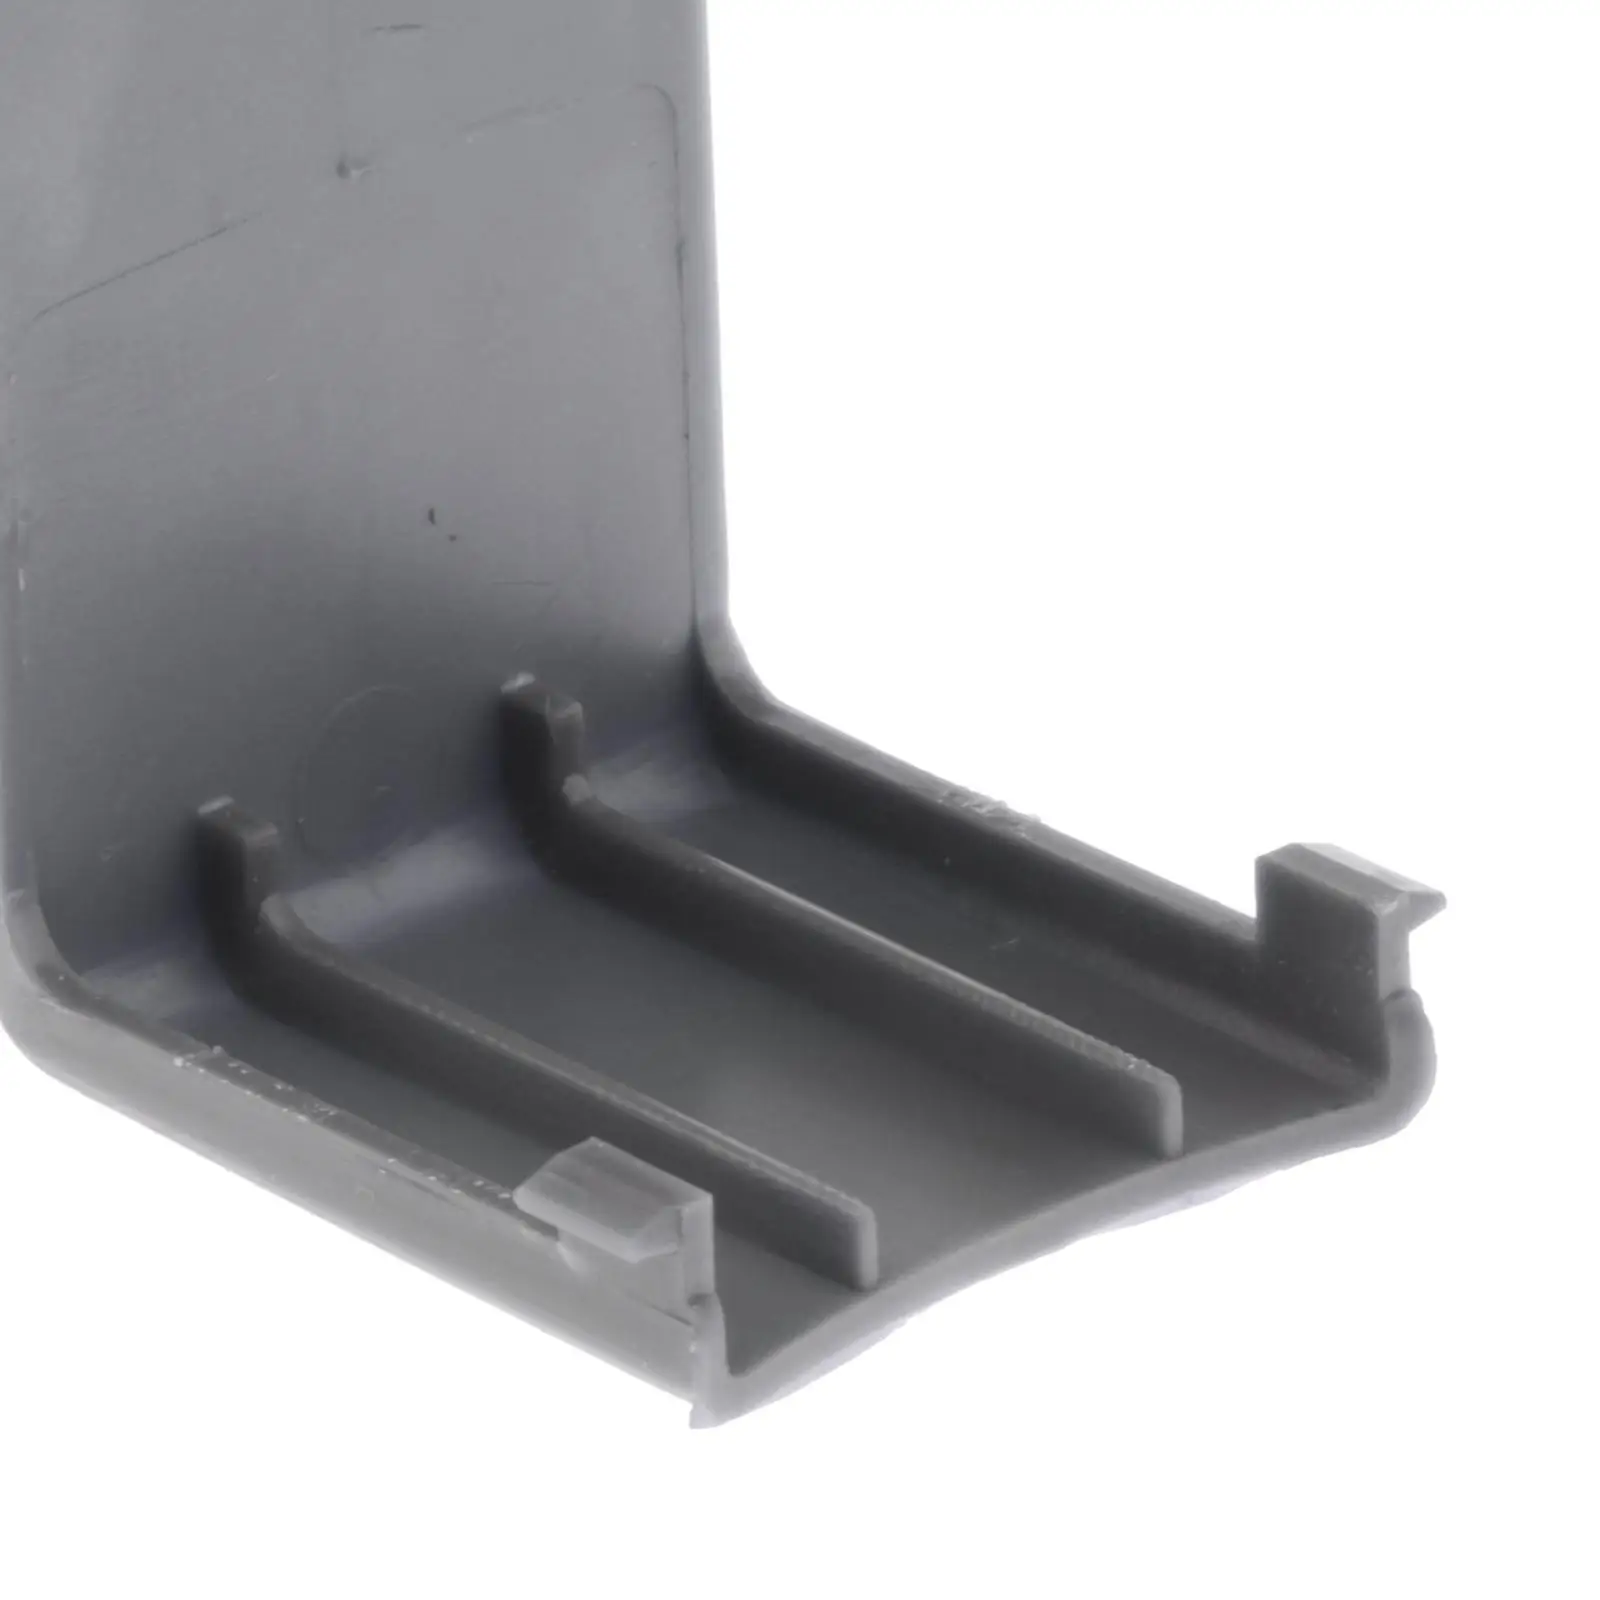  Cover for Yamaha 703 Series Outboard Control Box Using Practical Boat Engine Accessories